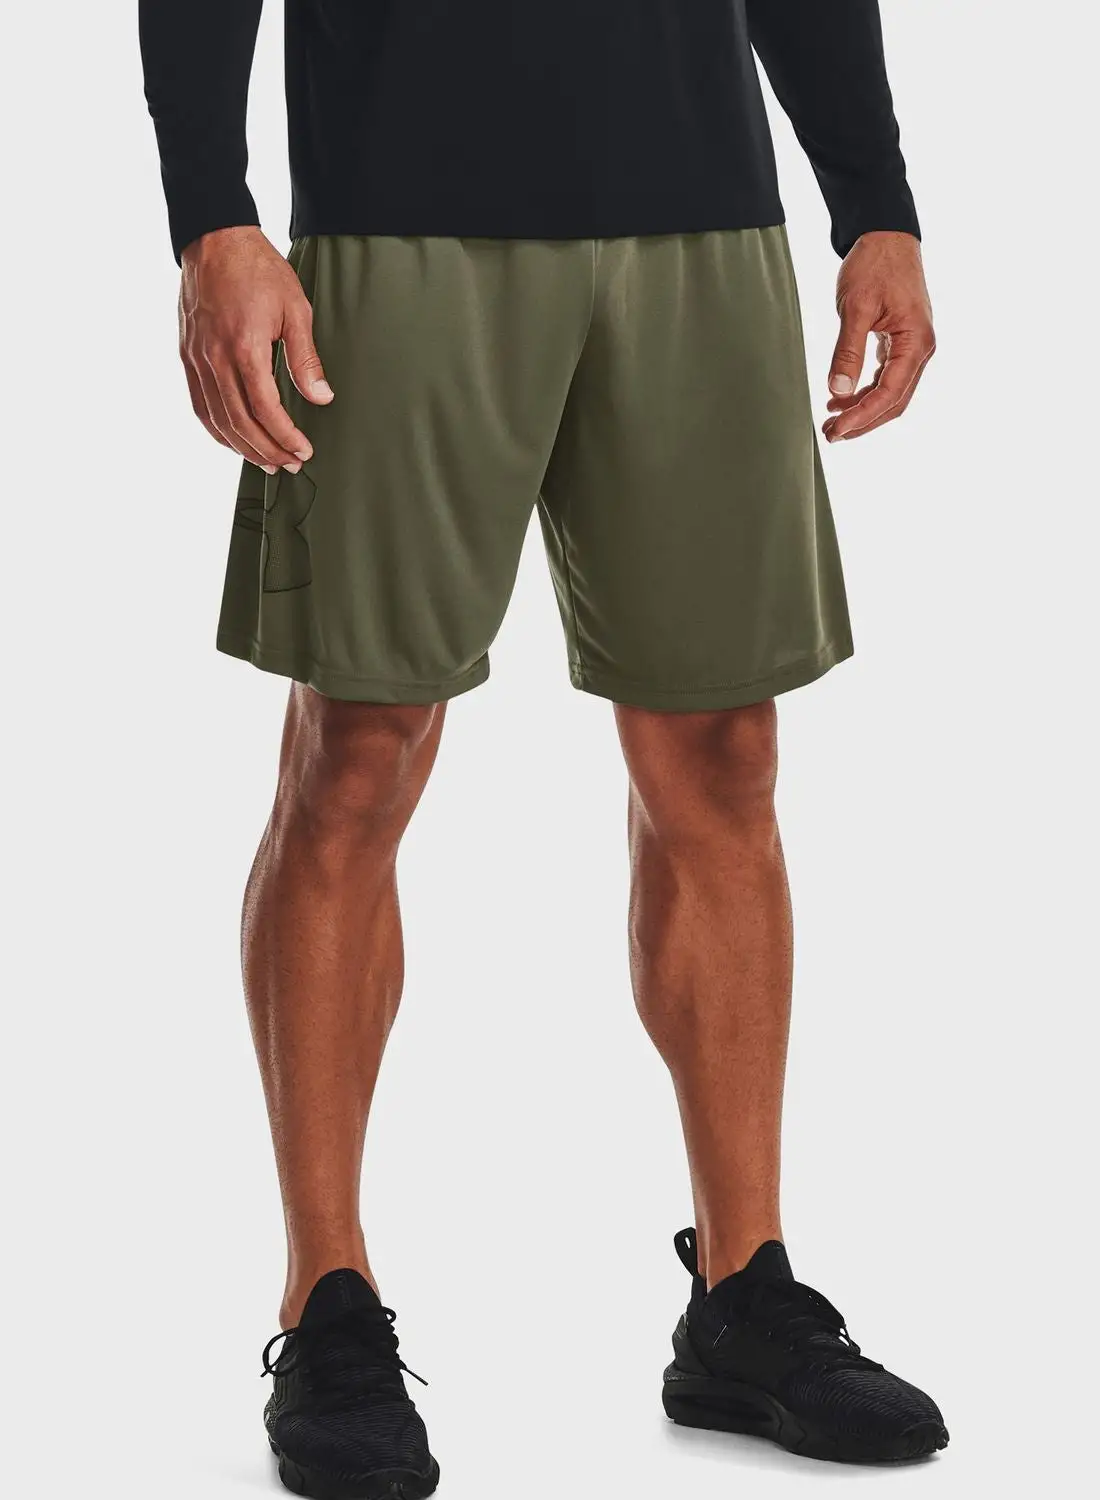 UNDER ARMOUR Tech Graphic Shorts